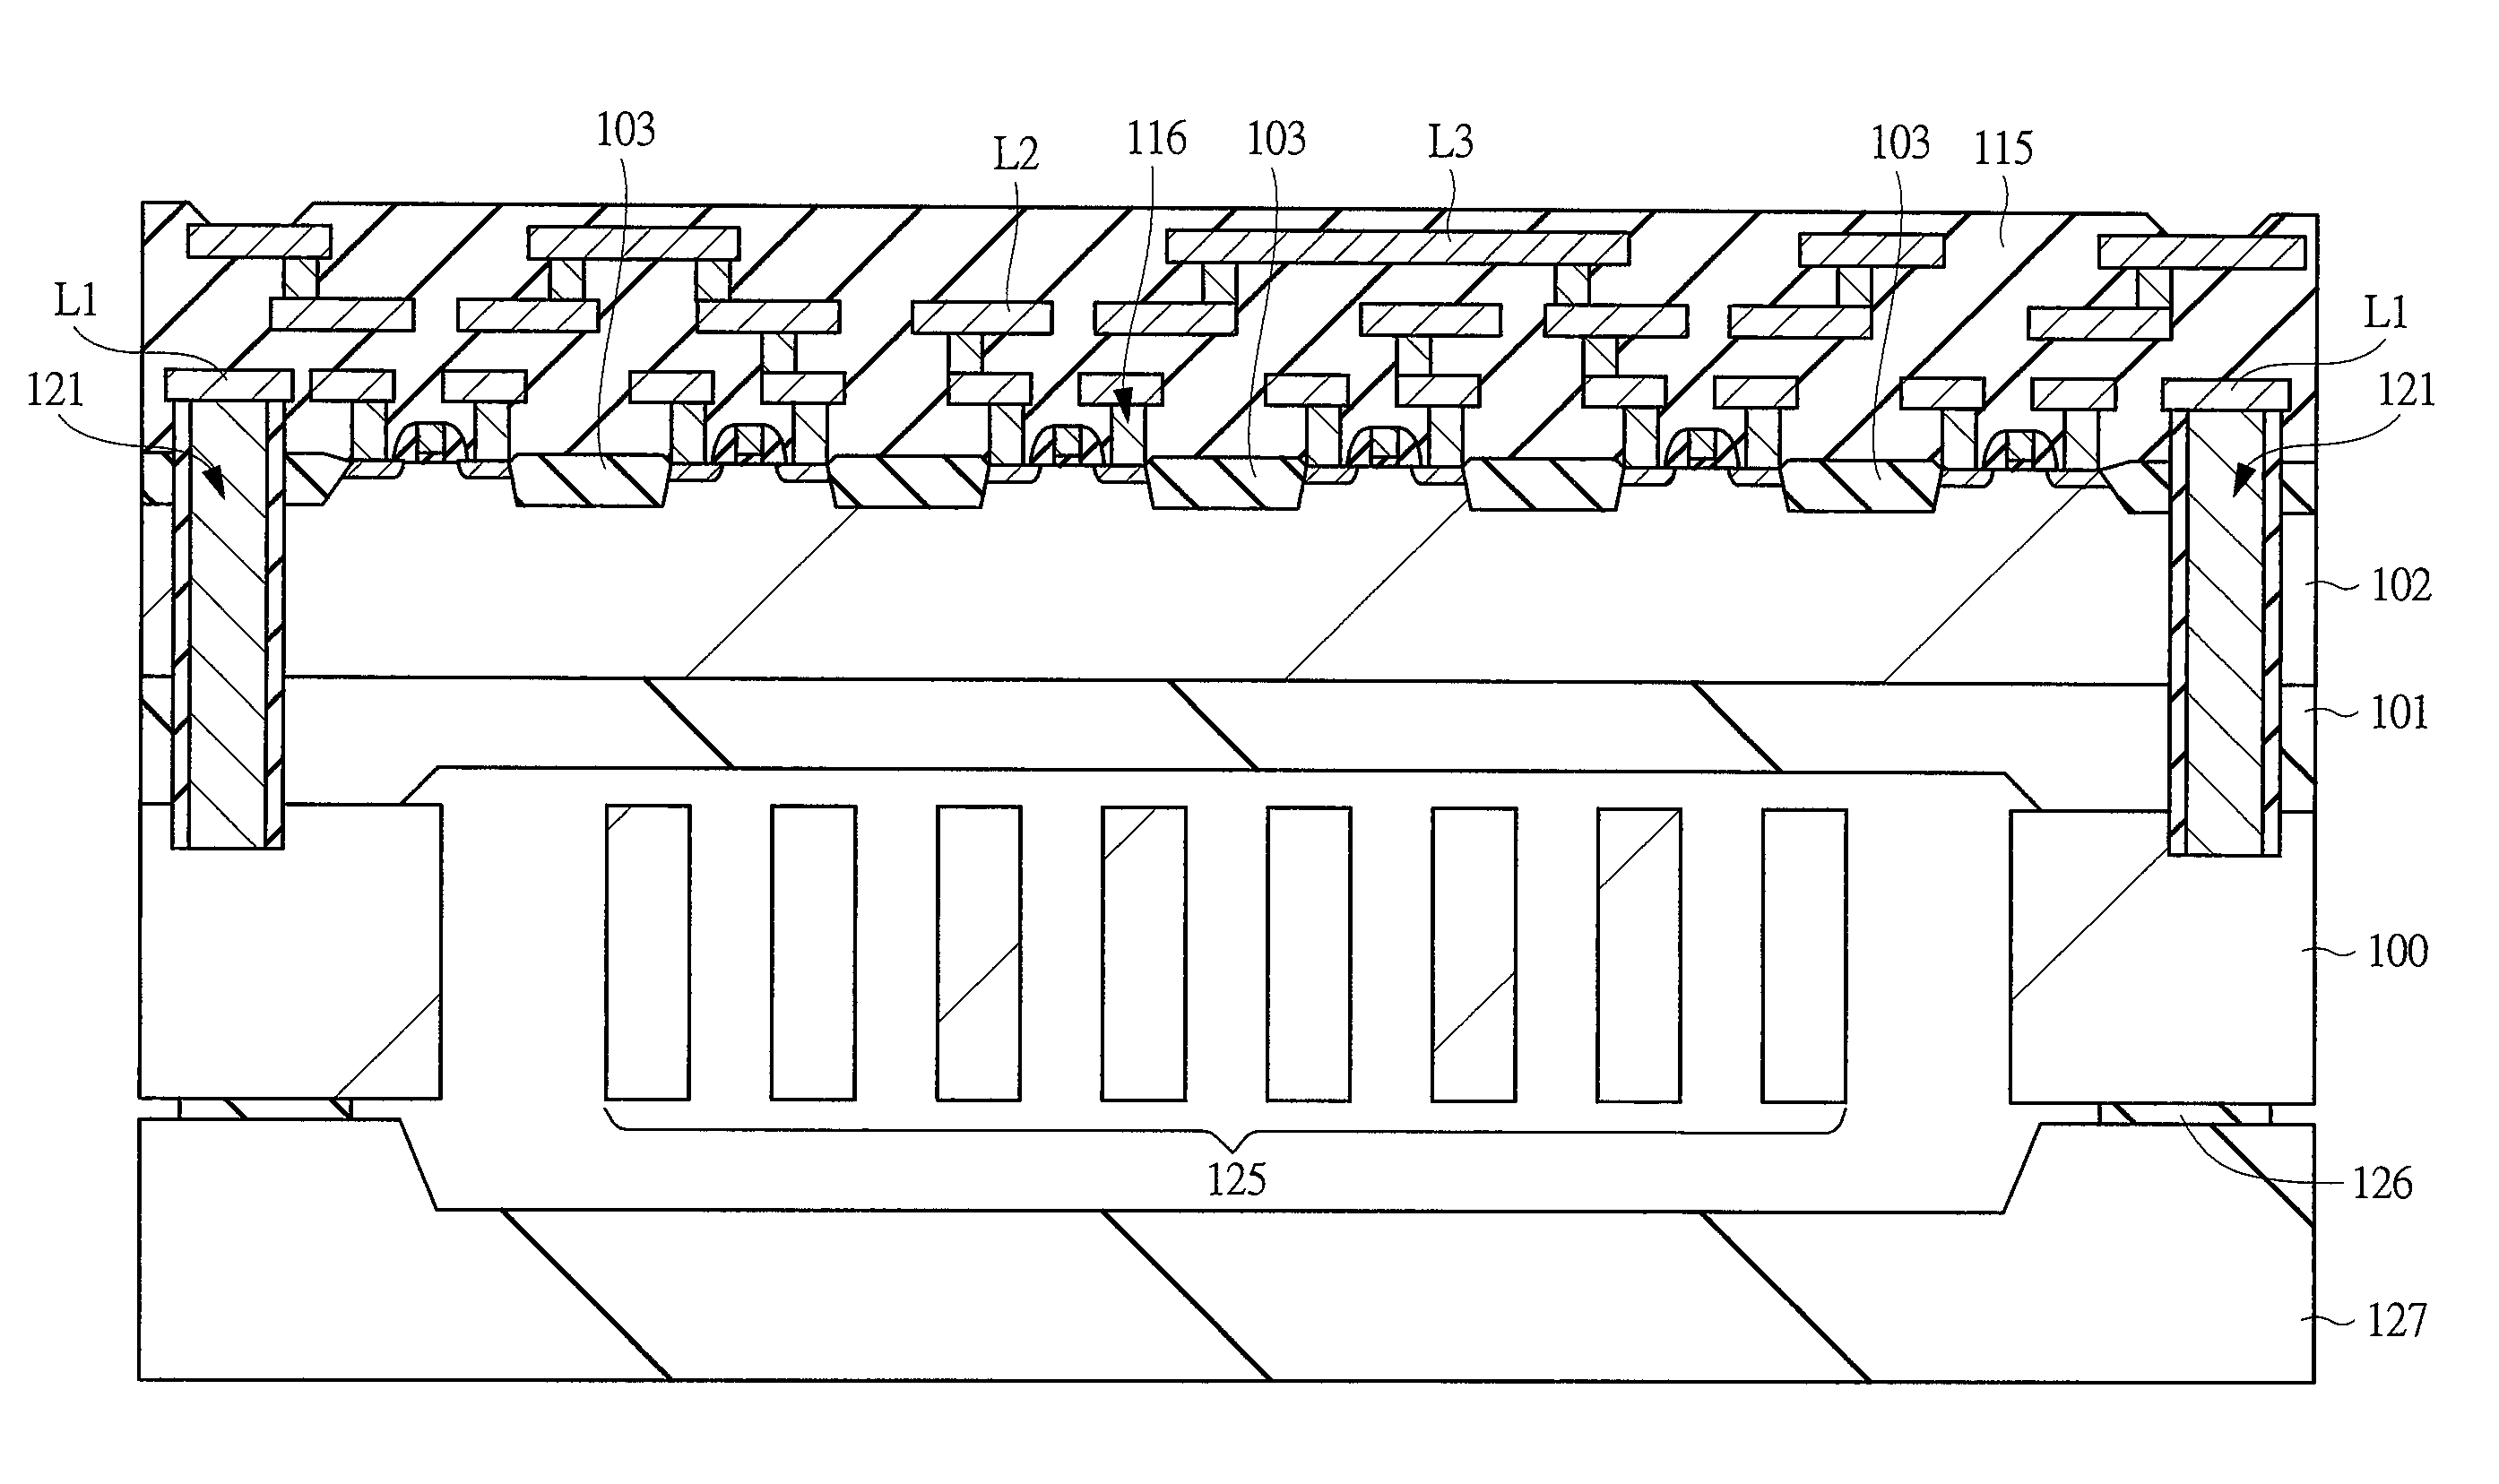 Semiconductor device with integrated circuit electrically connected to a MEMS sensor by a through-electrode